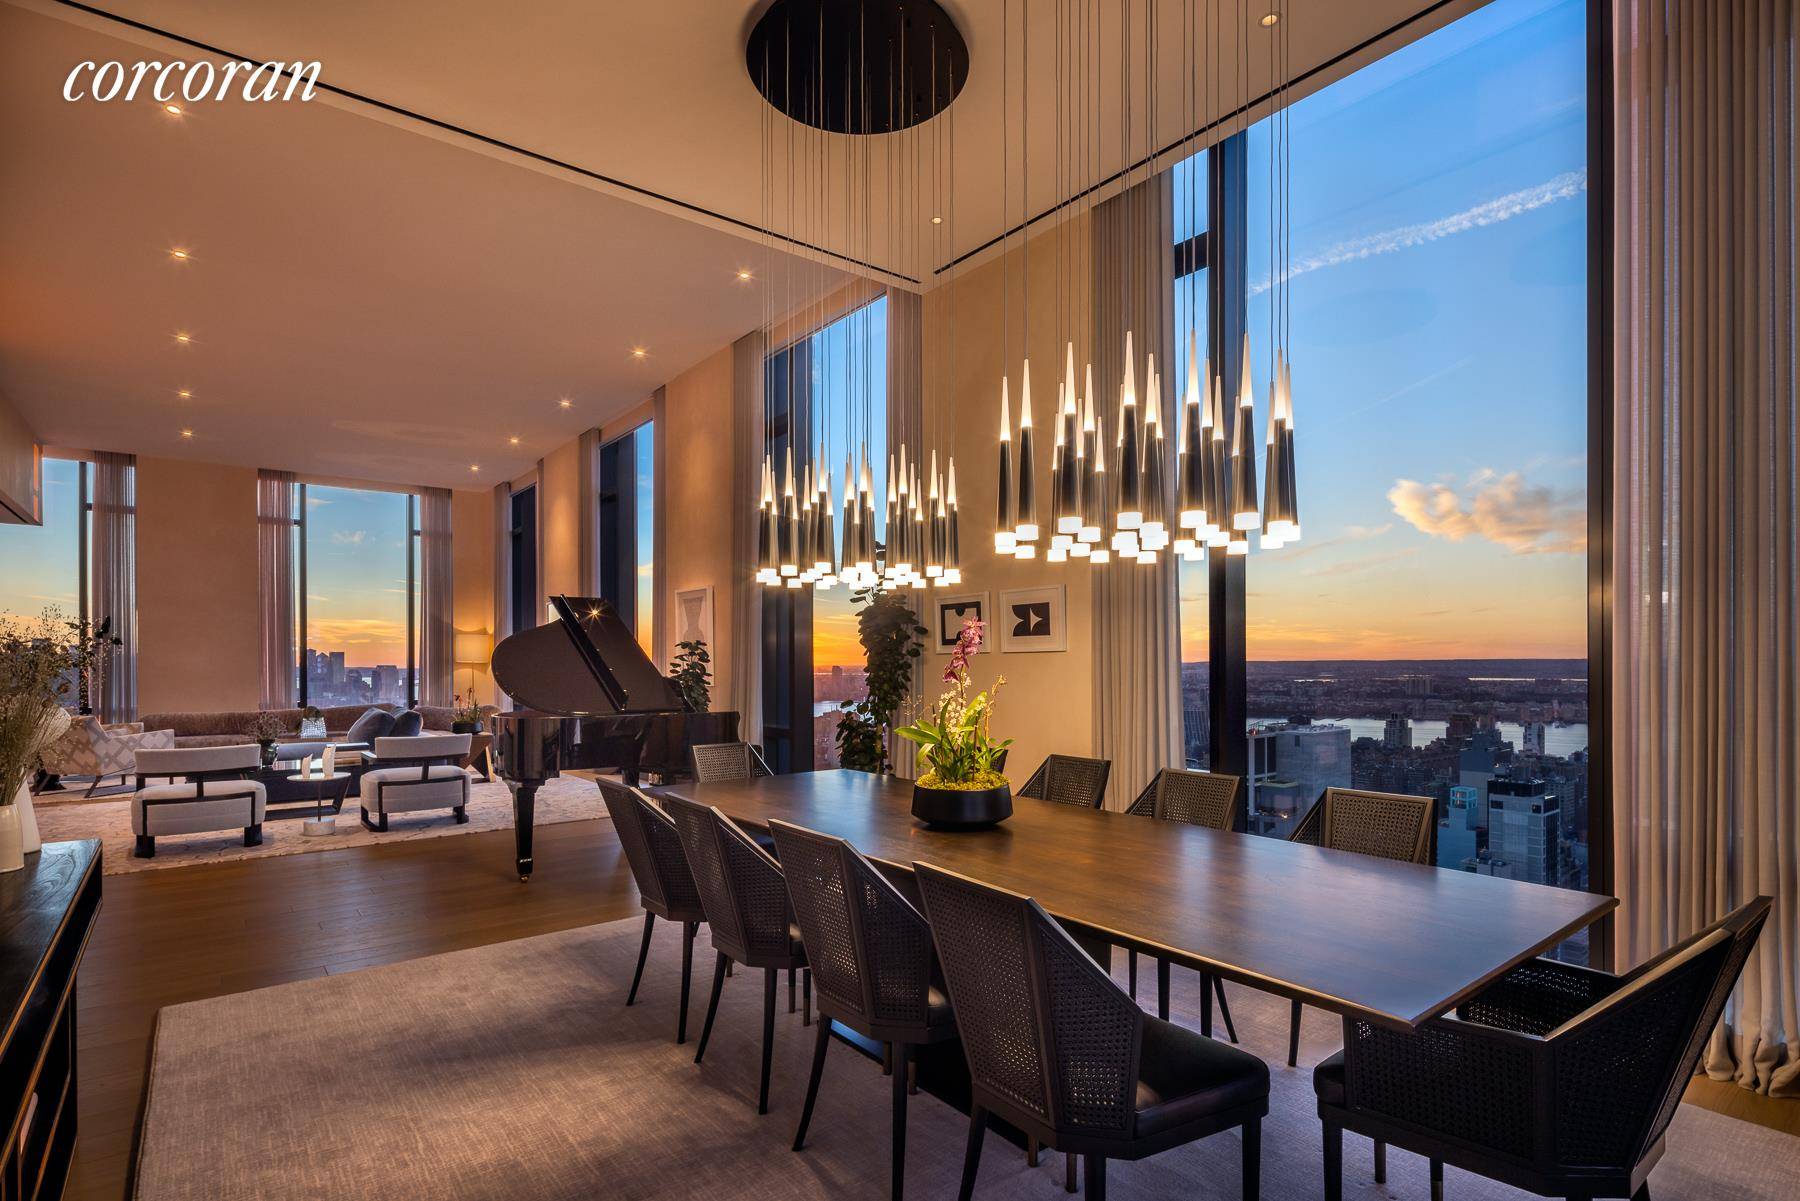 277 Fifth Avenue, the tallest residential building on Fifth Avenue designed by renowned architect Rafael Vinoly, offers spectacular panoramic horizons from this special full floor Penthouse that span the city ...